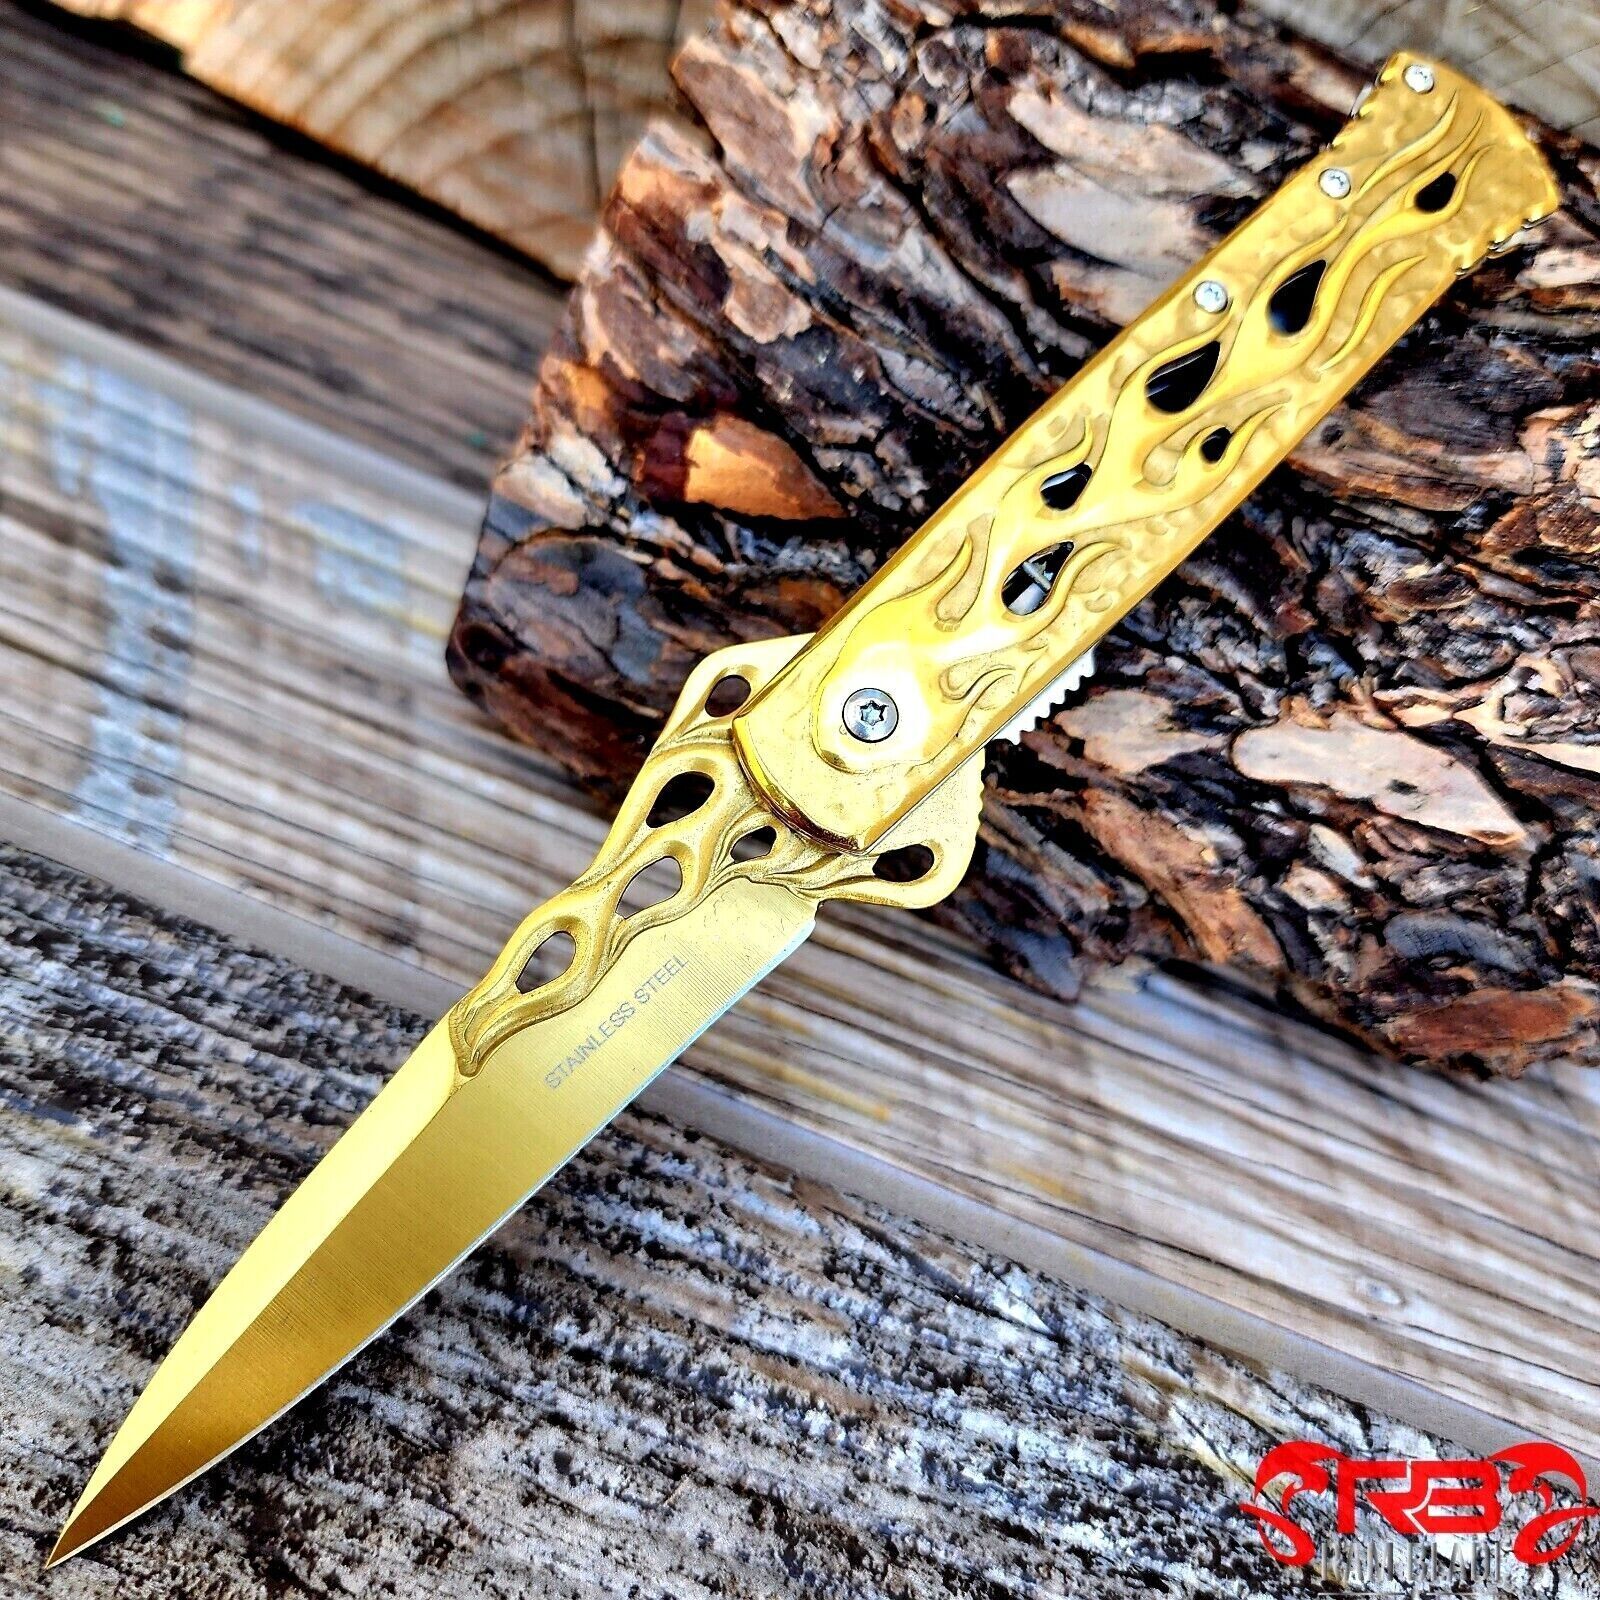 9” FLAME SPRING OPEN ASSISTED TACTICAL FOLDING OPEN POCKET KNIFE EDC Blade EDC